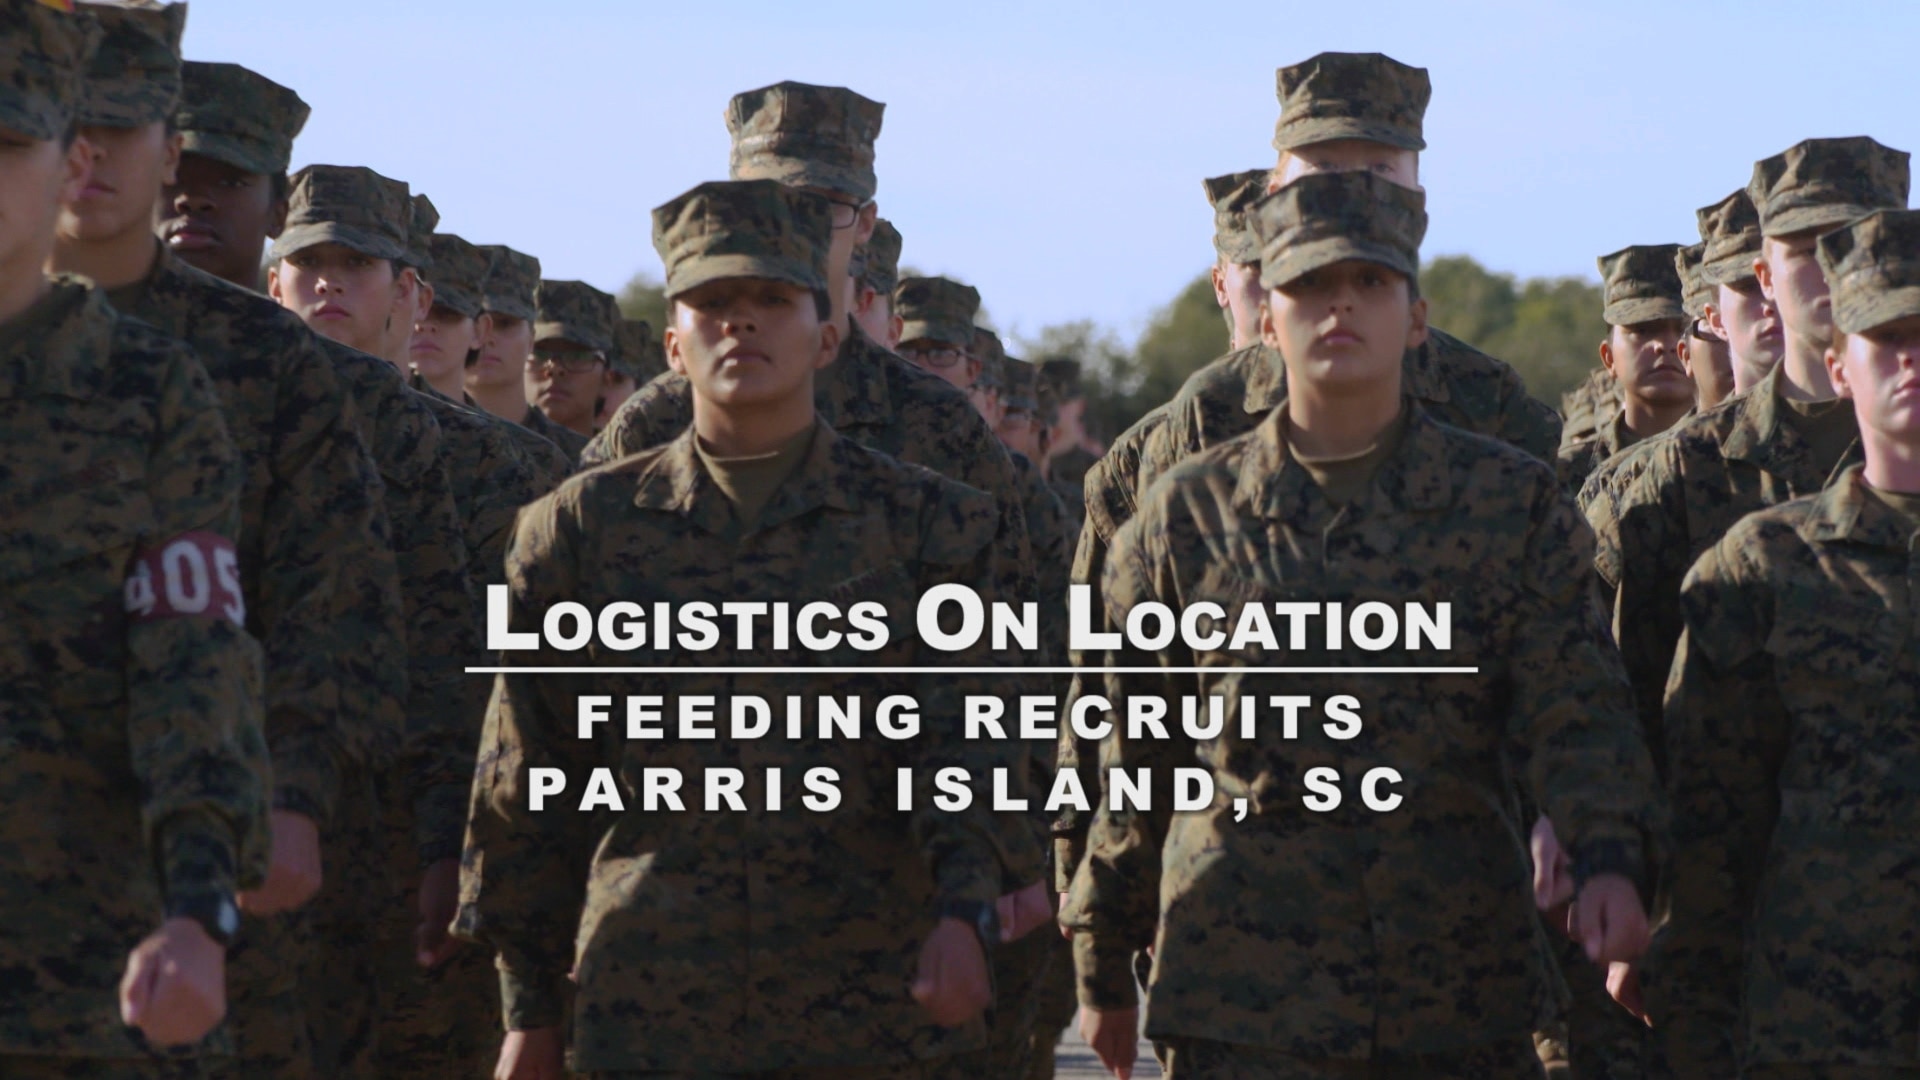 Marine recruits standing in formation looking forward with overlay title, Logistics On Location feeding recruits Parris Island, South Carolina.